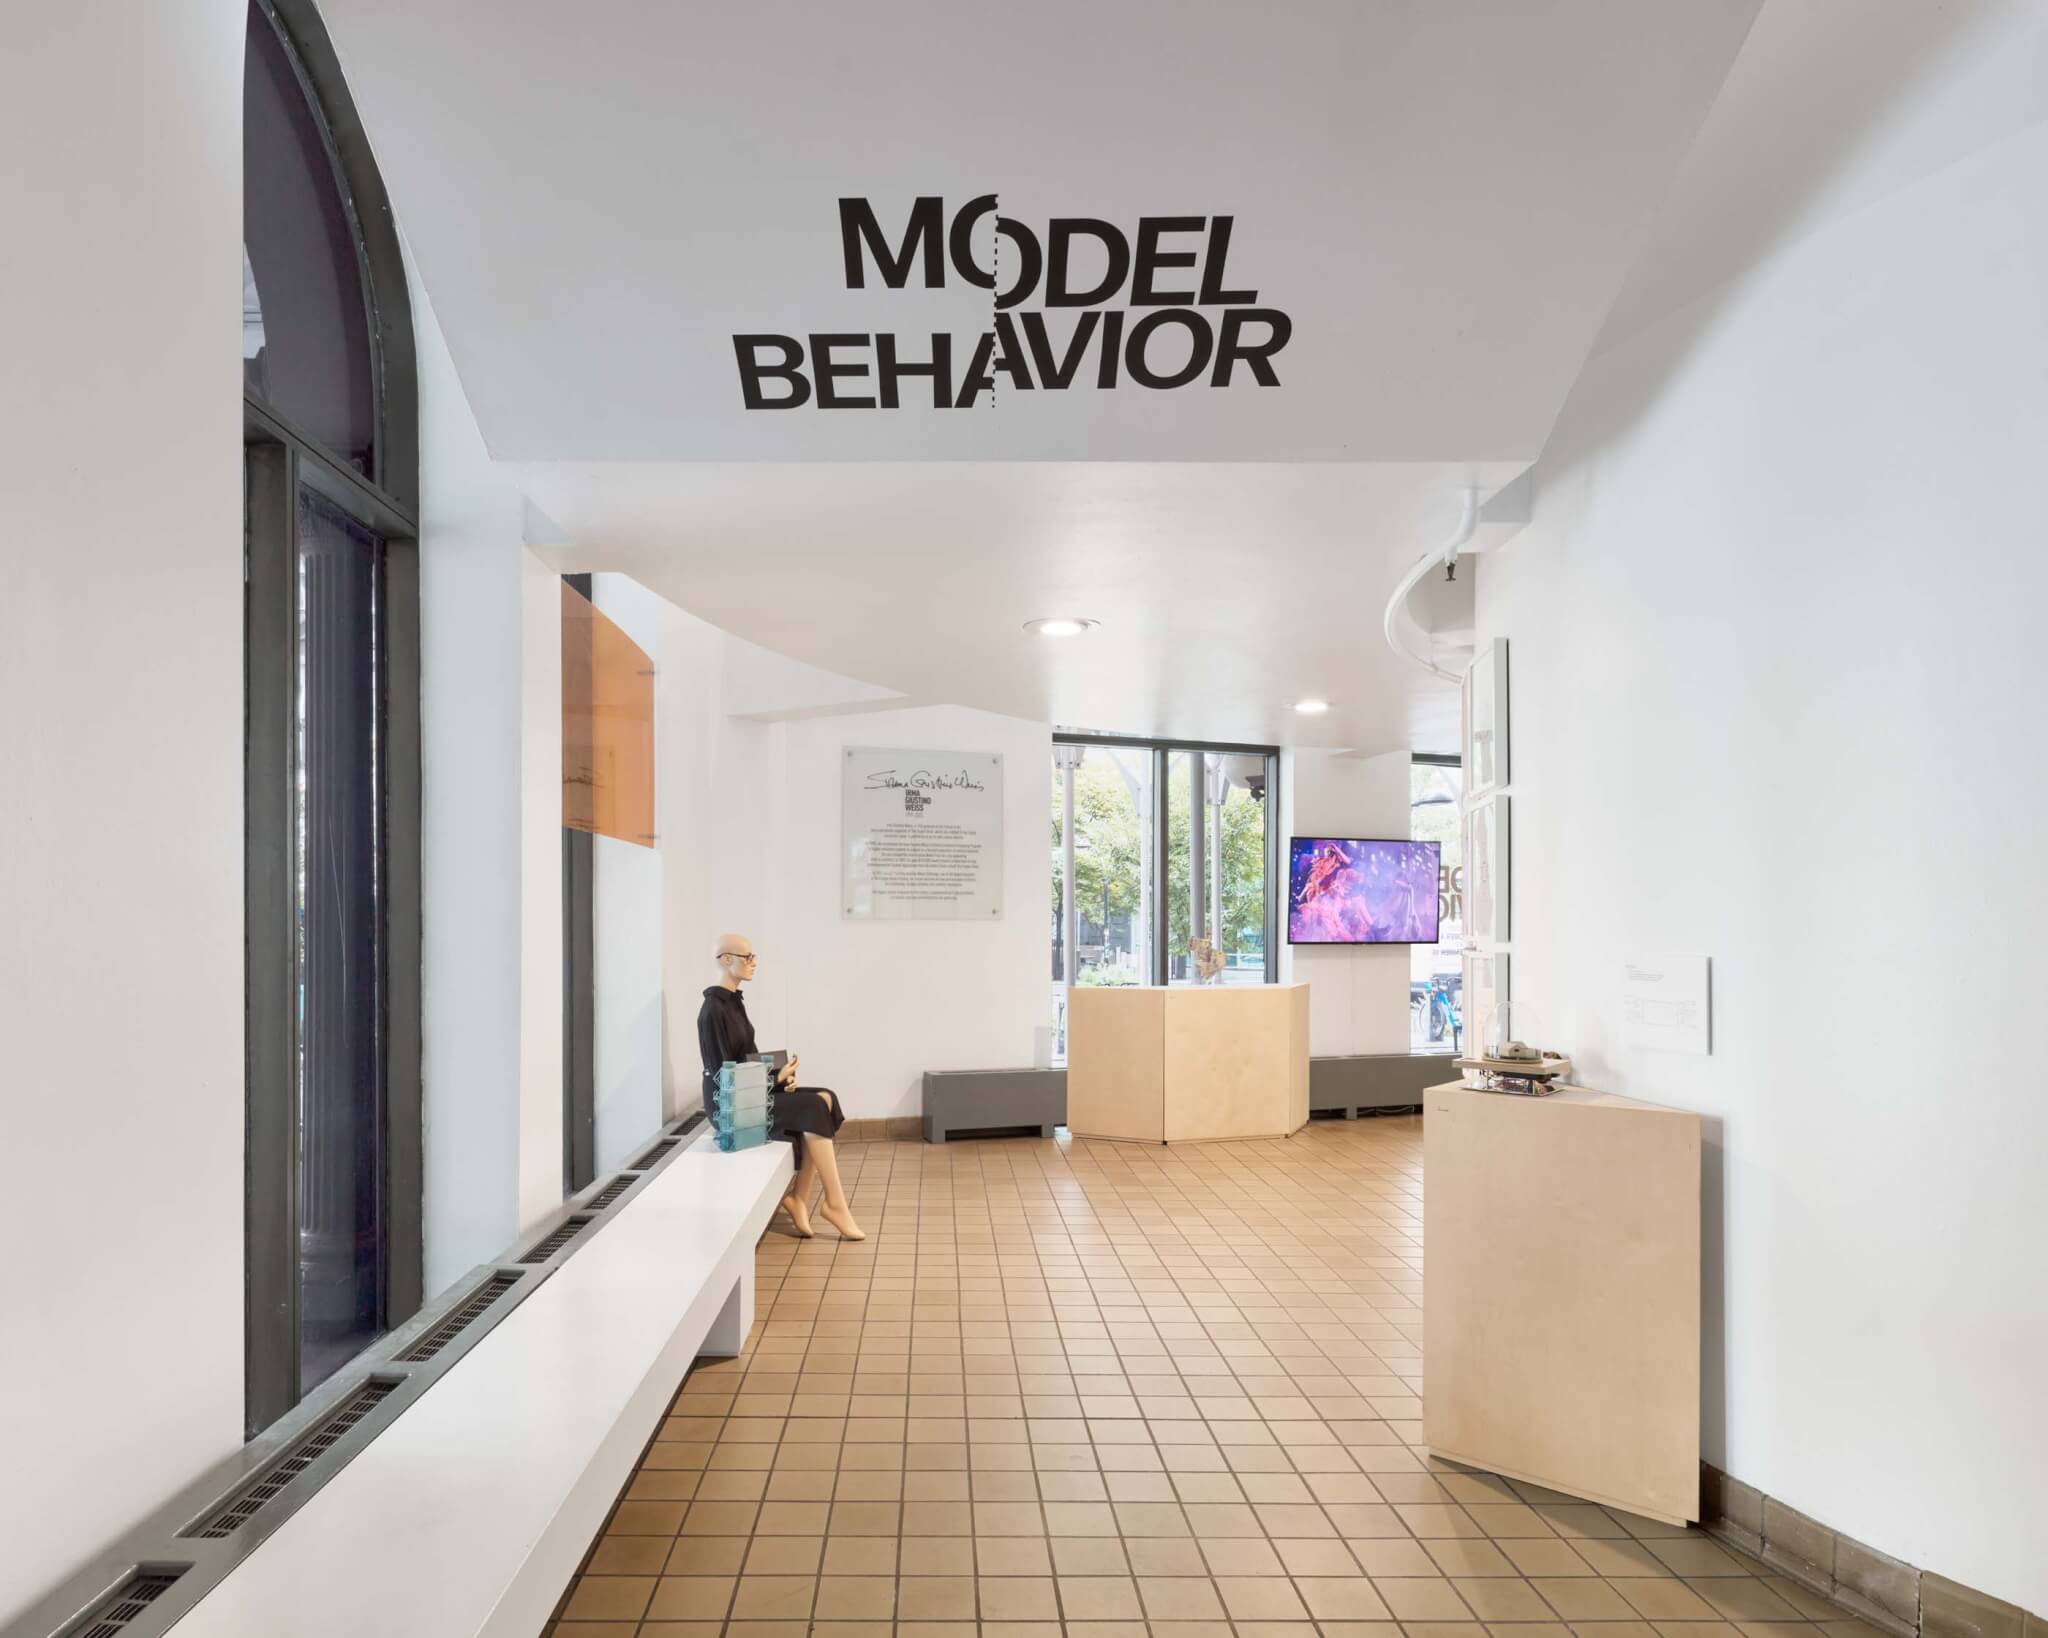 entry to model behavior exhibition with exhibition title text on ceiling